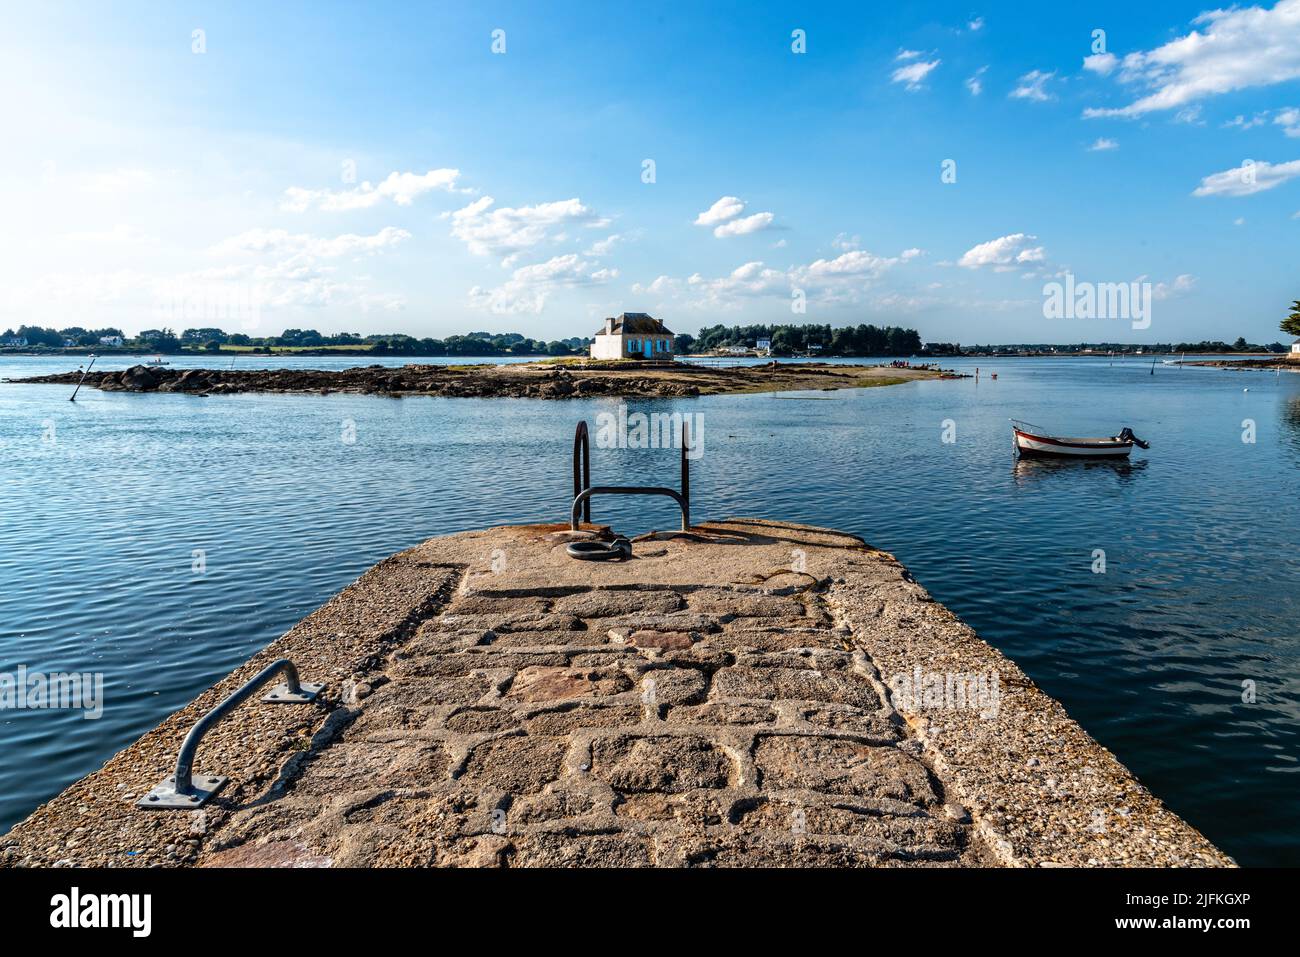 Small island with a cottage in the Etel River, Ile de Saint-Cado, Brittany, France. House in water with fishing boats. Stock Photo